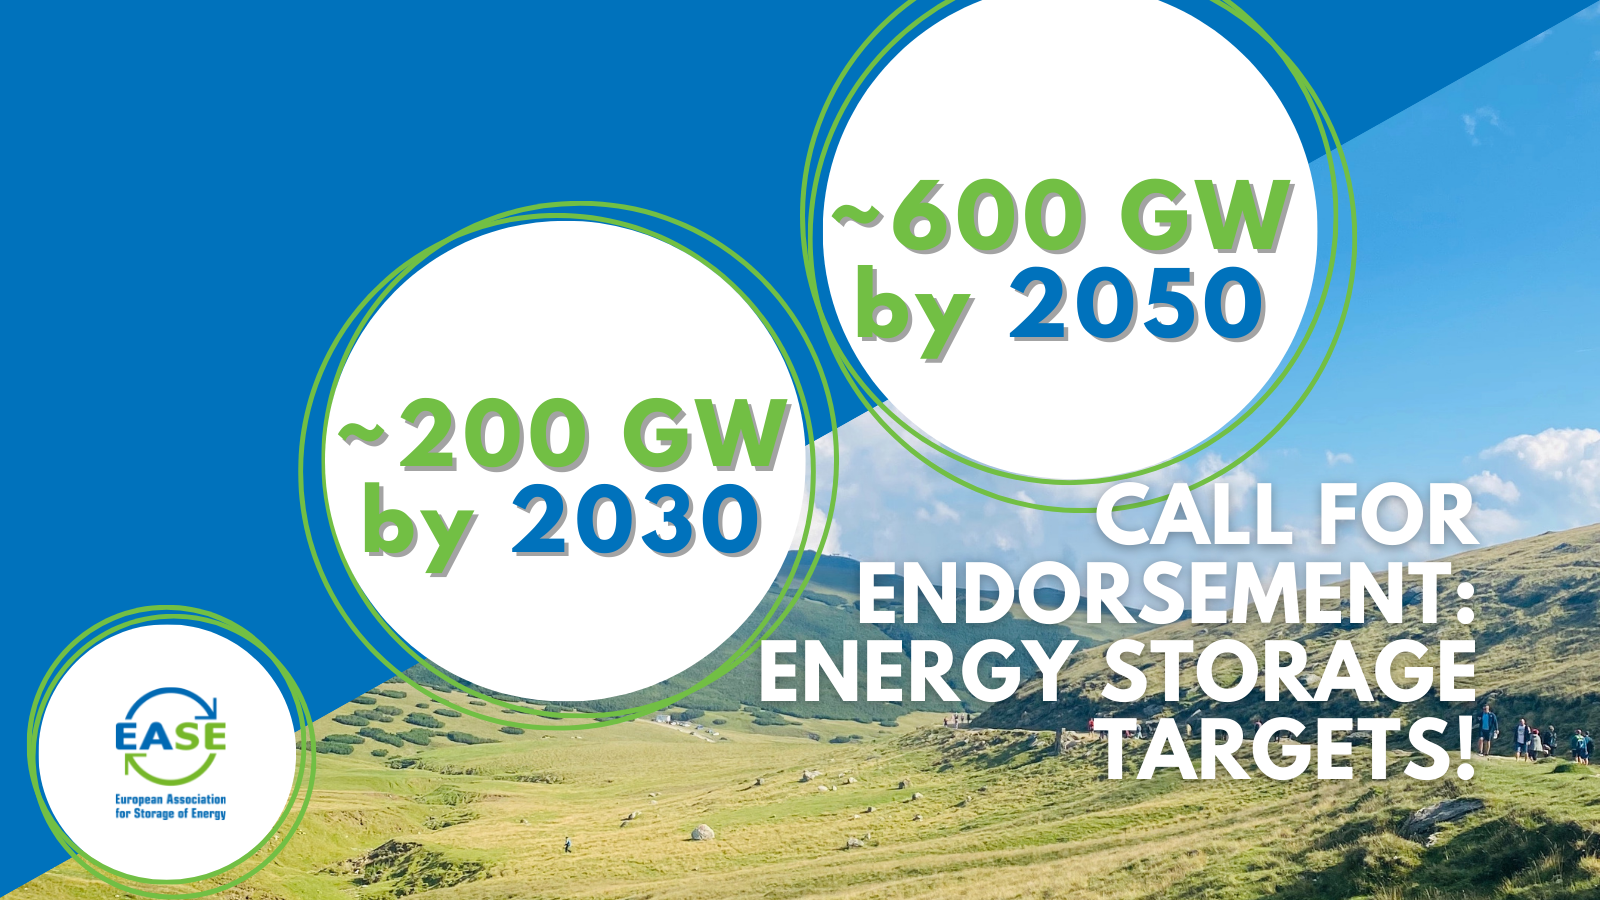 Call for Endorsement: Energy Storage Targets!